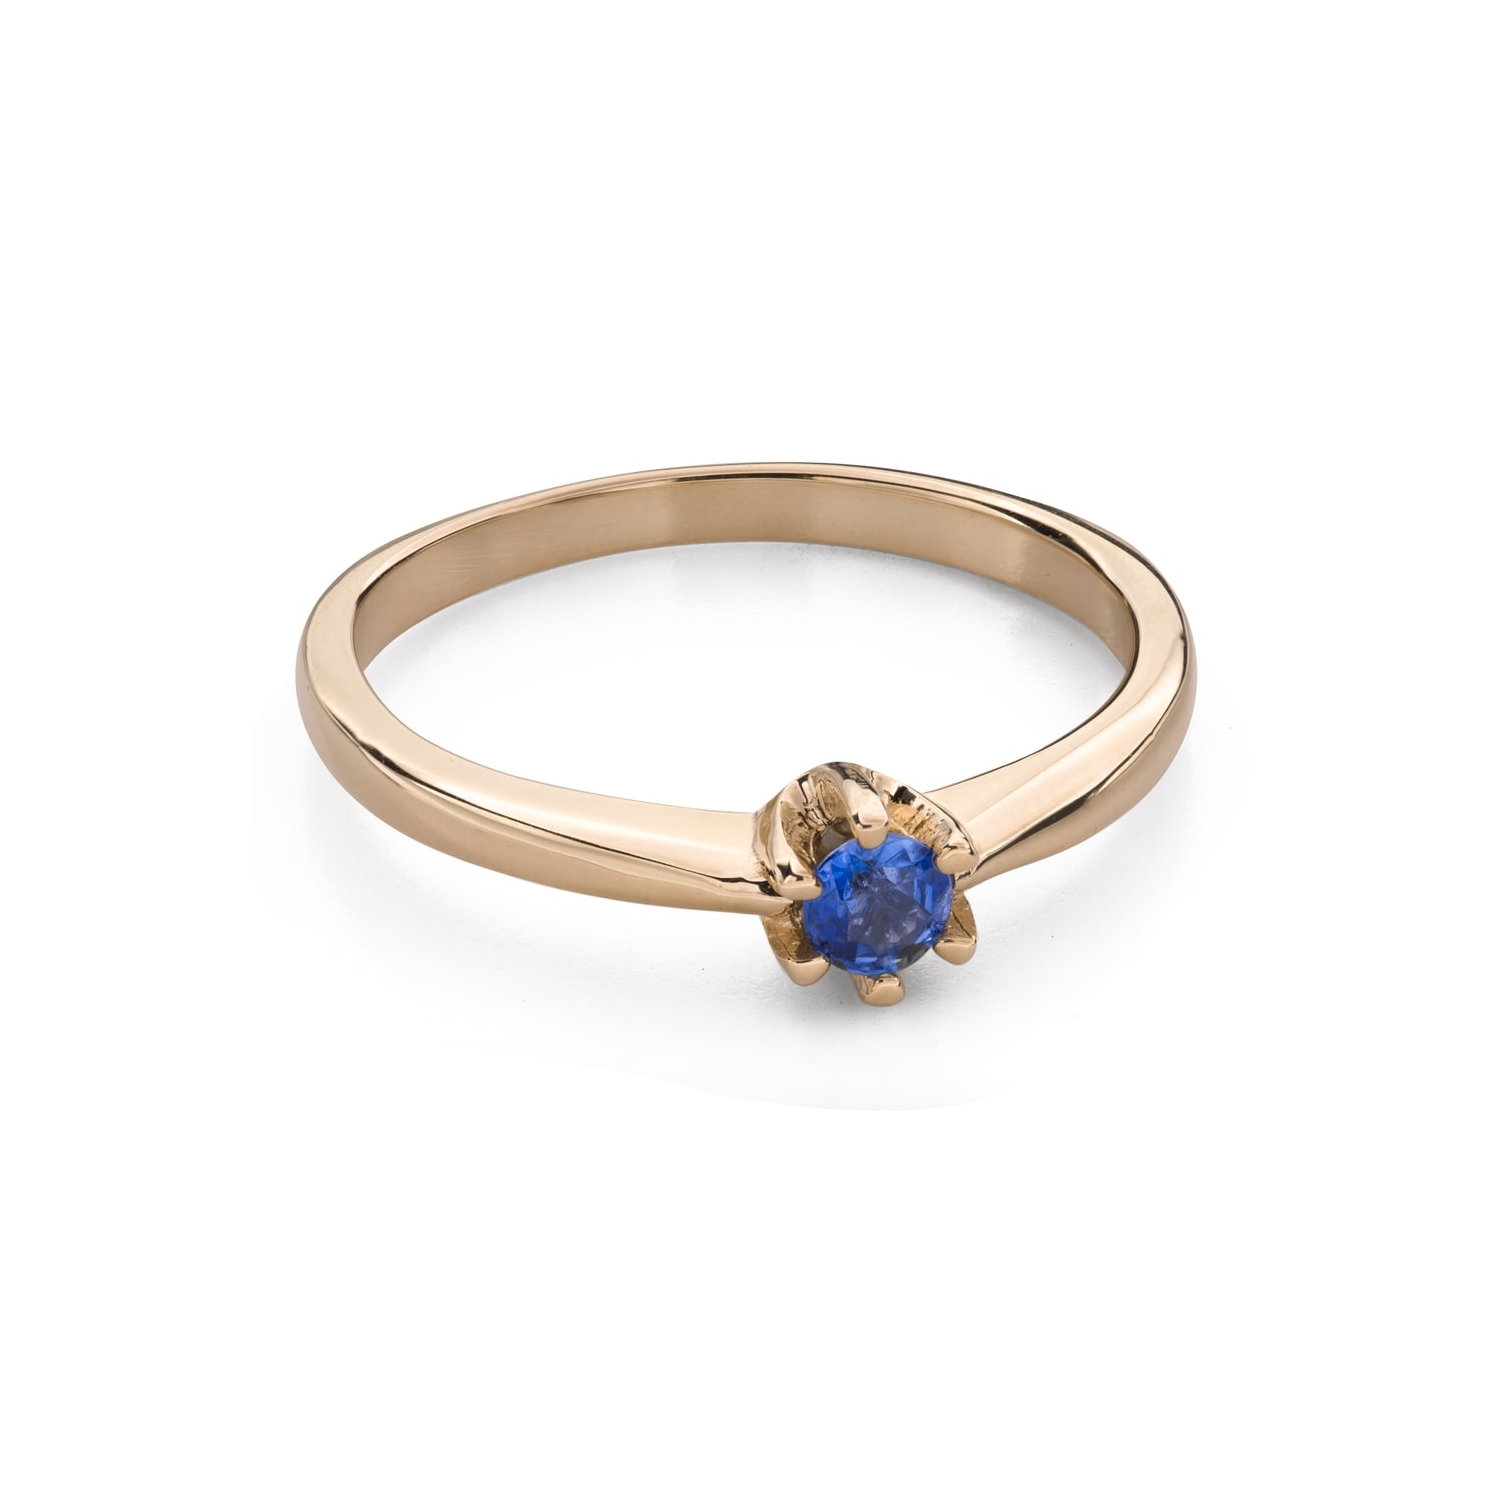 Engagement ring with gemstones "Sapphire 57"